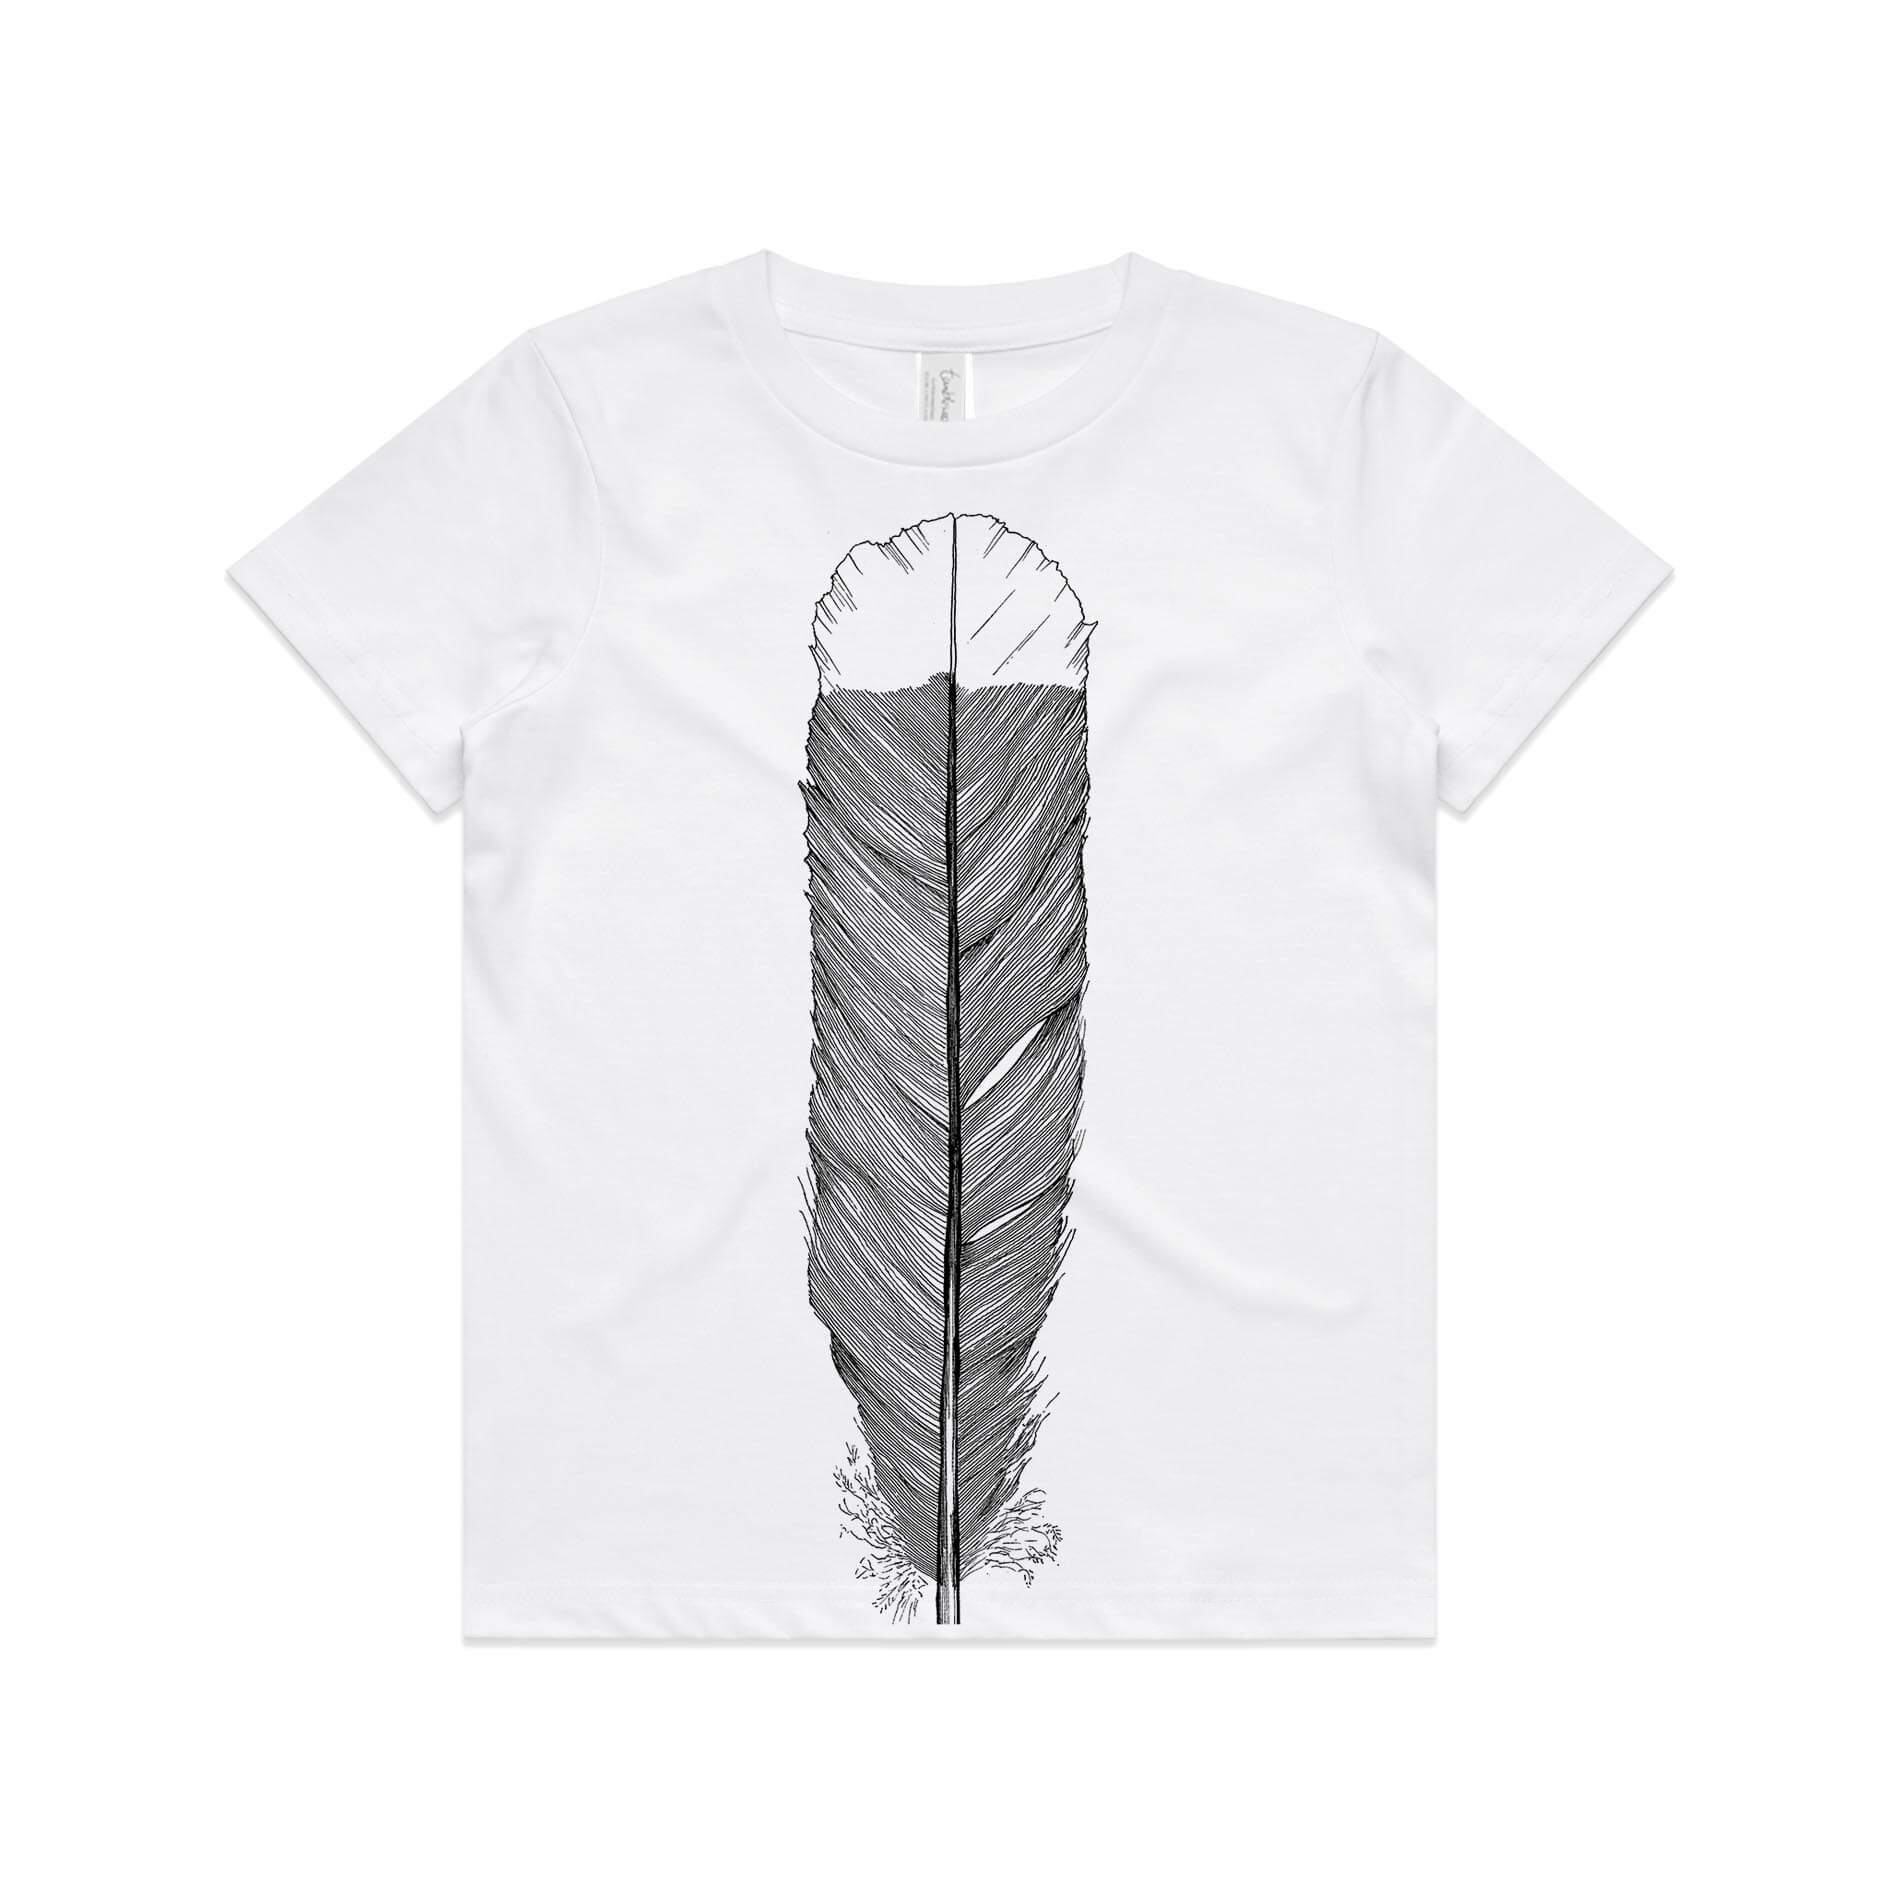 White, cotton kids' t-shirt with screen printed Kids huia feather design.